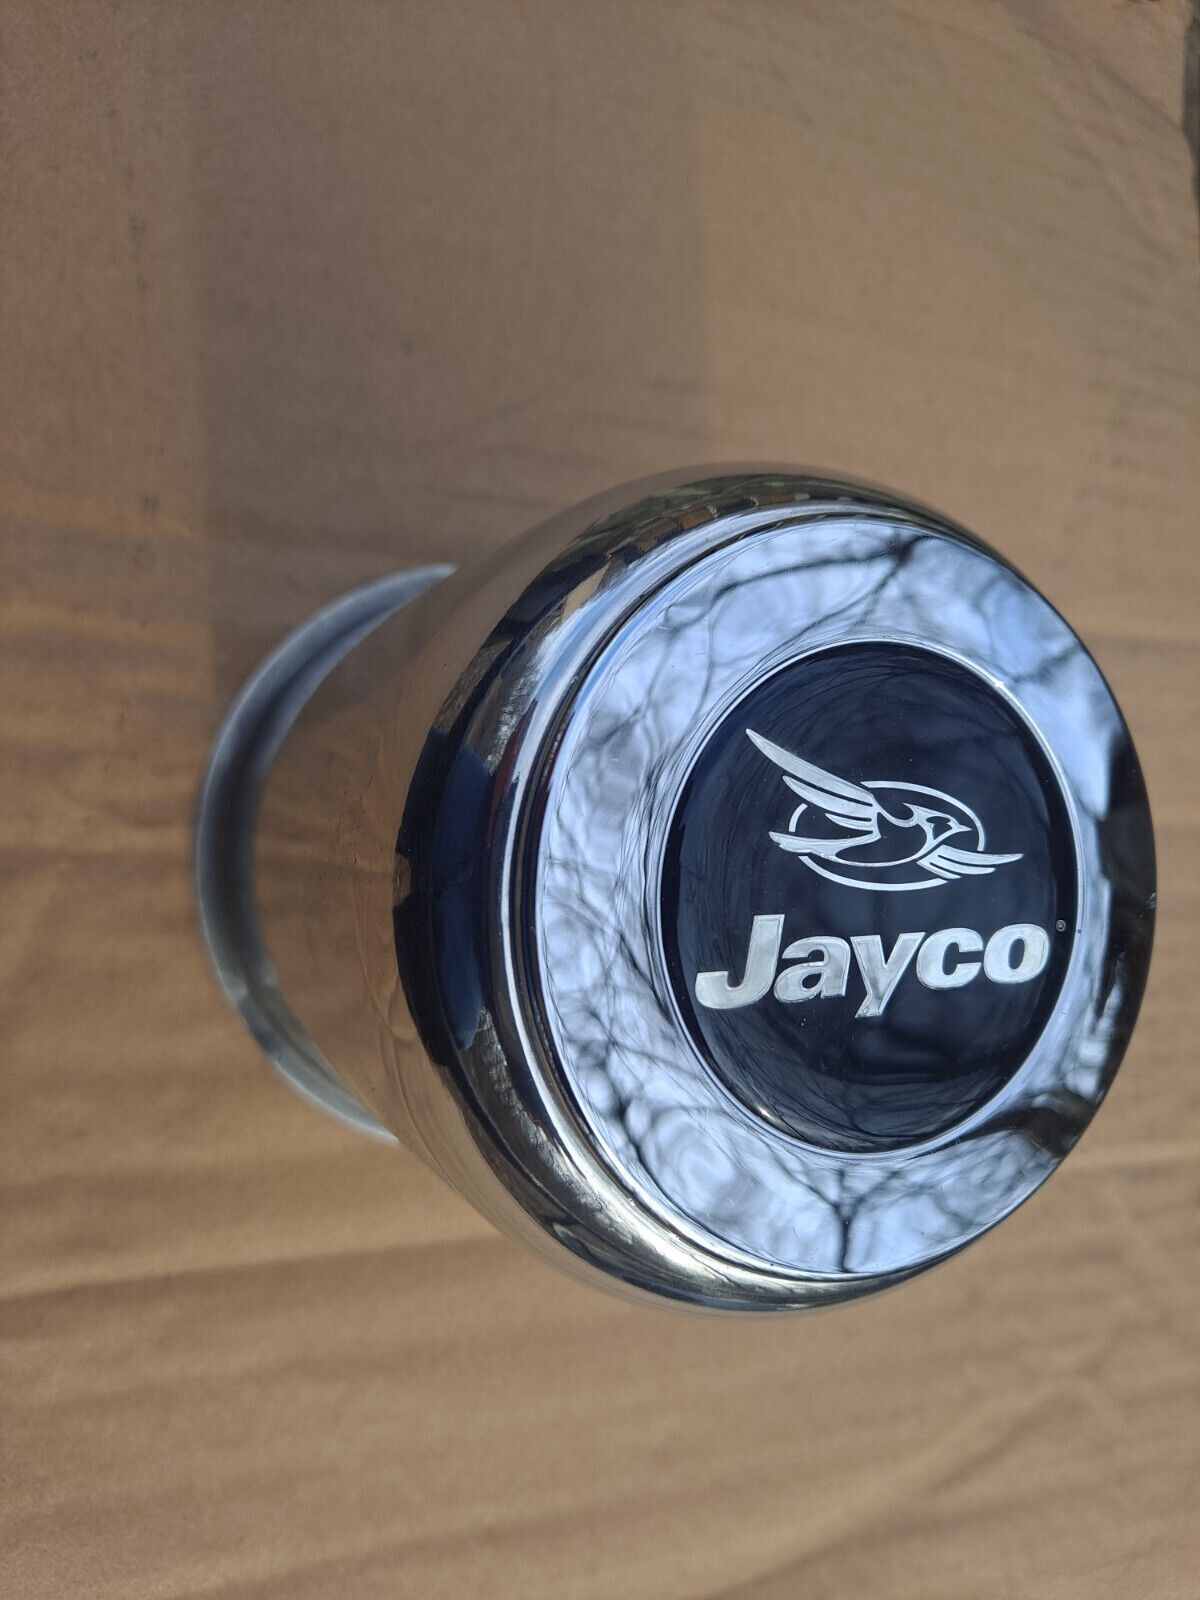 JAYCO OEM SS CENTER CAP(S) FOR A 15 INCH / 16 WHEEL 6 LUG  (PRICE PER CAP) 3.75 